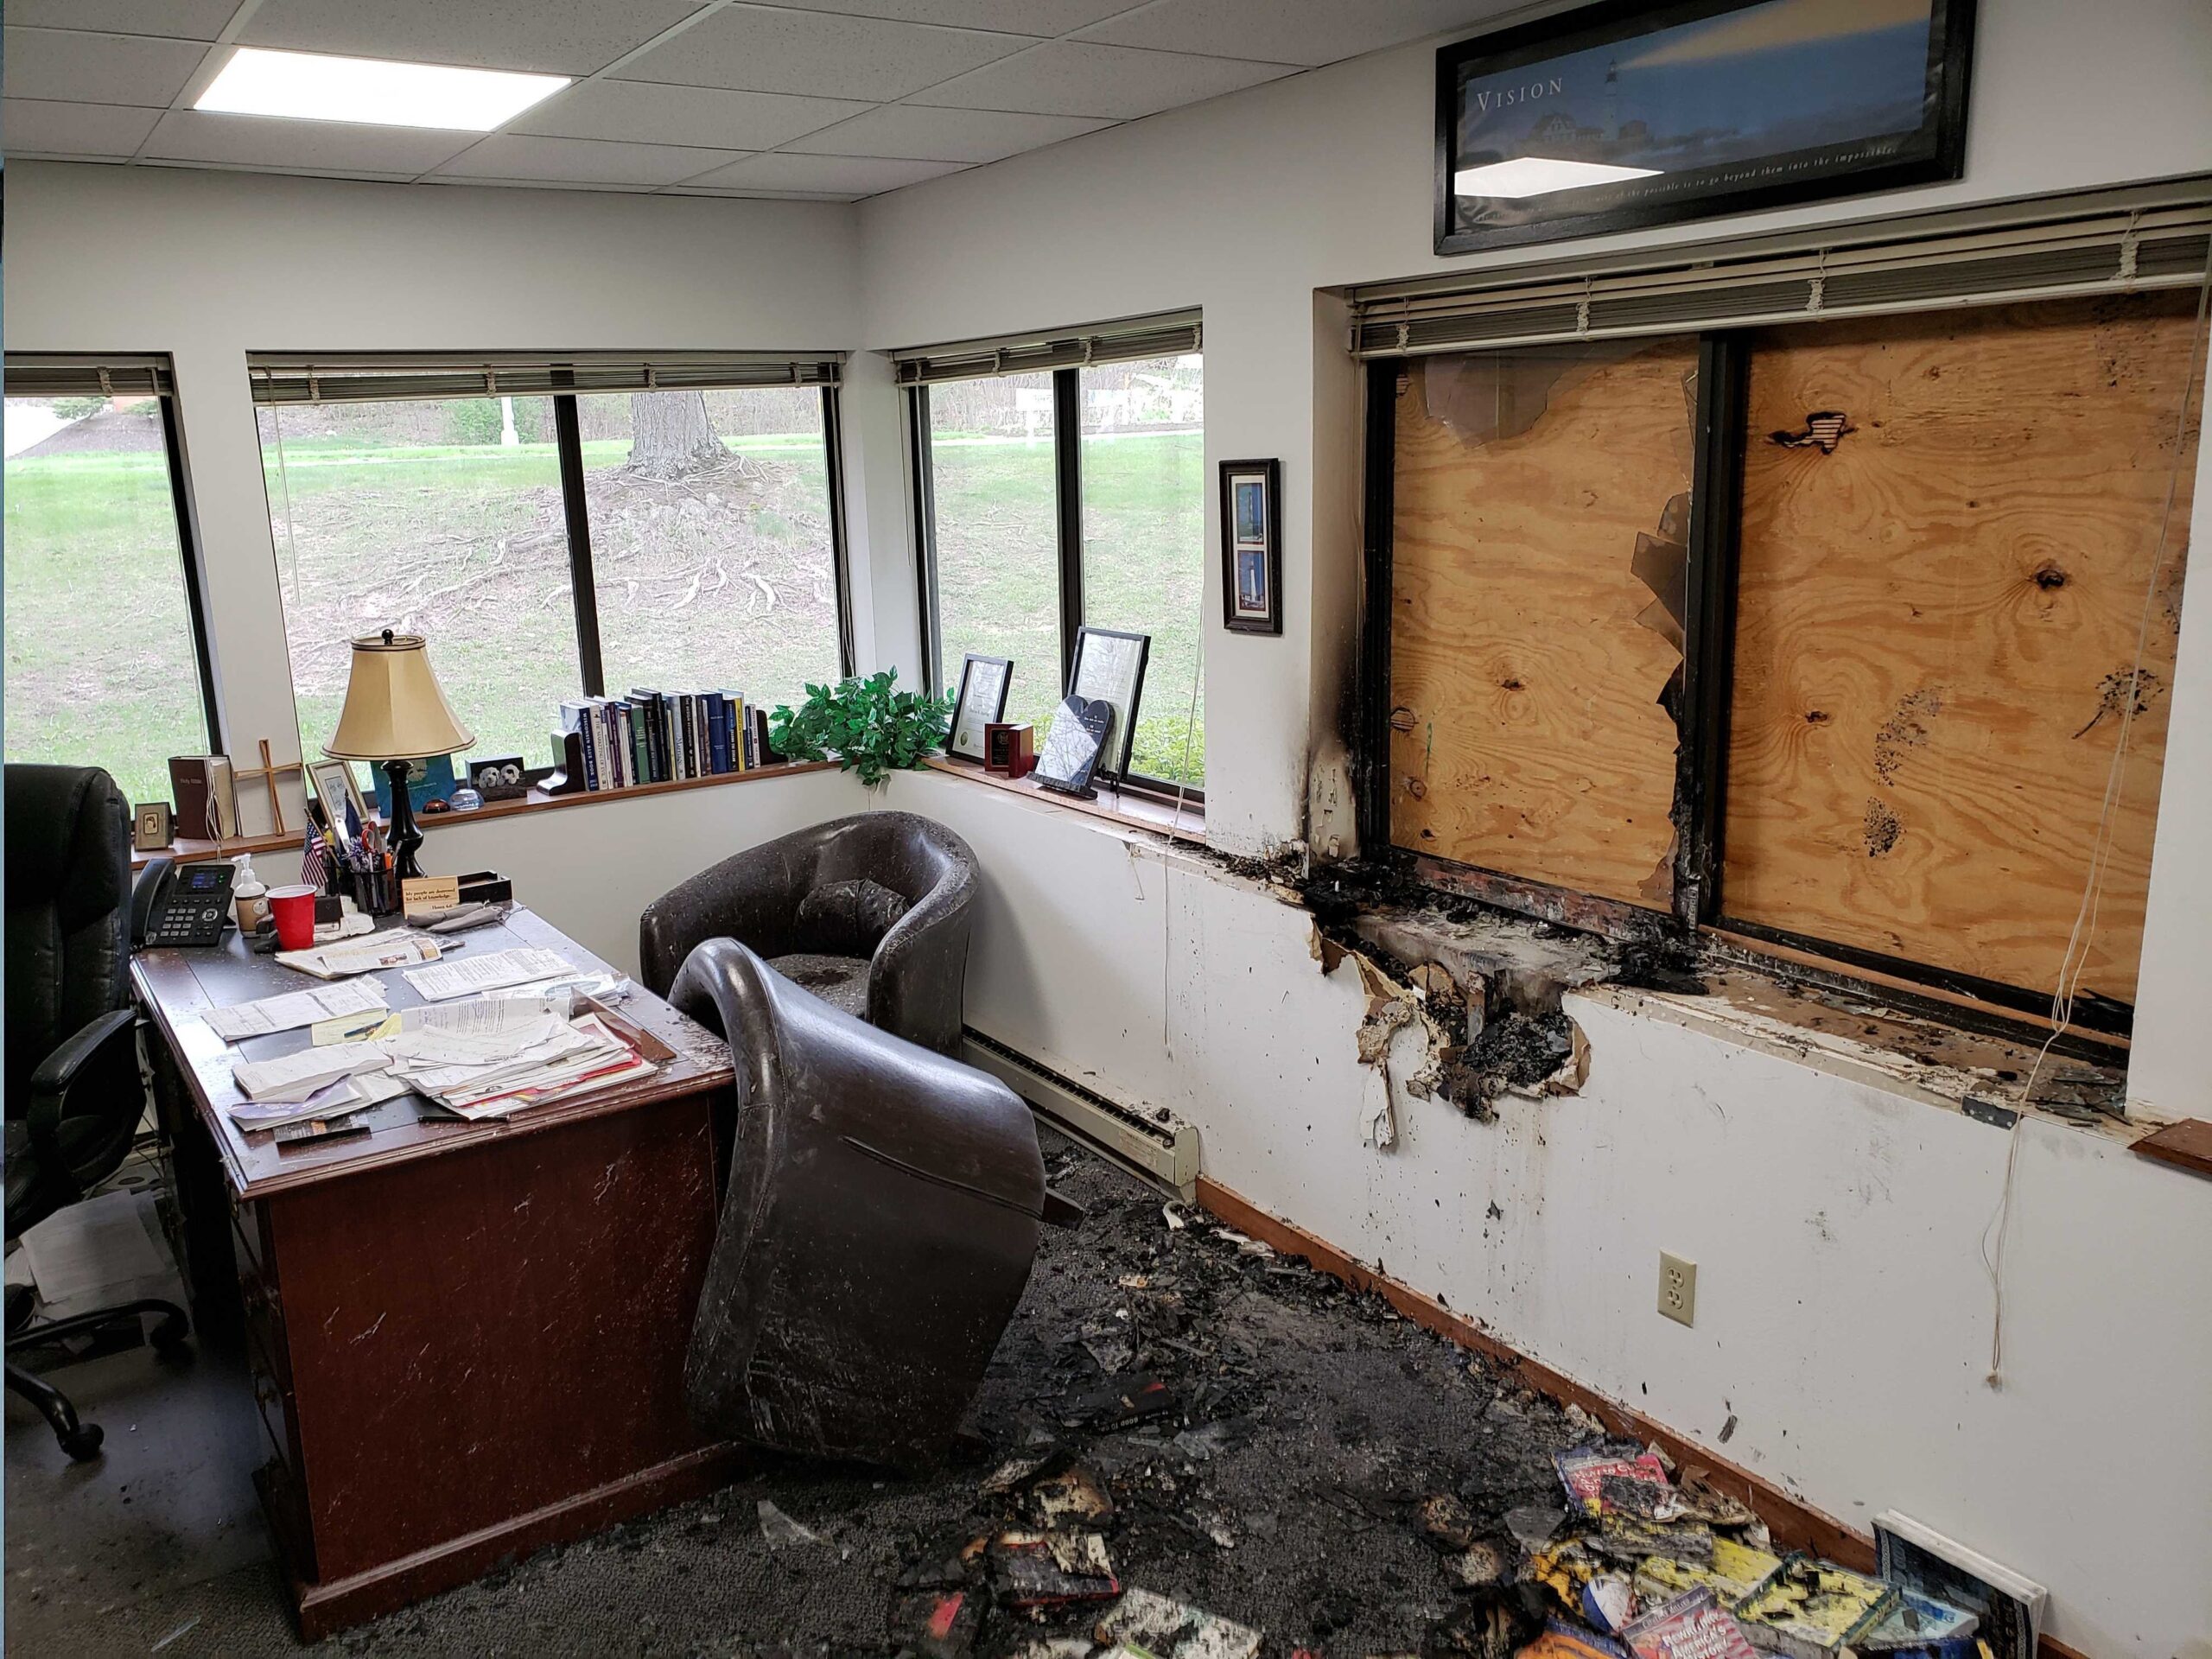 Damage to the inside and outside of the Wisconsin Family Action's offices in Madison is being investigated as 